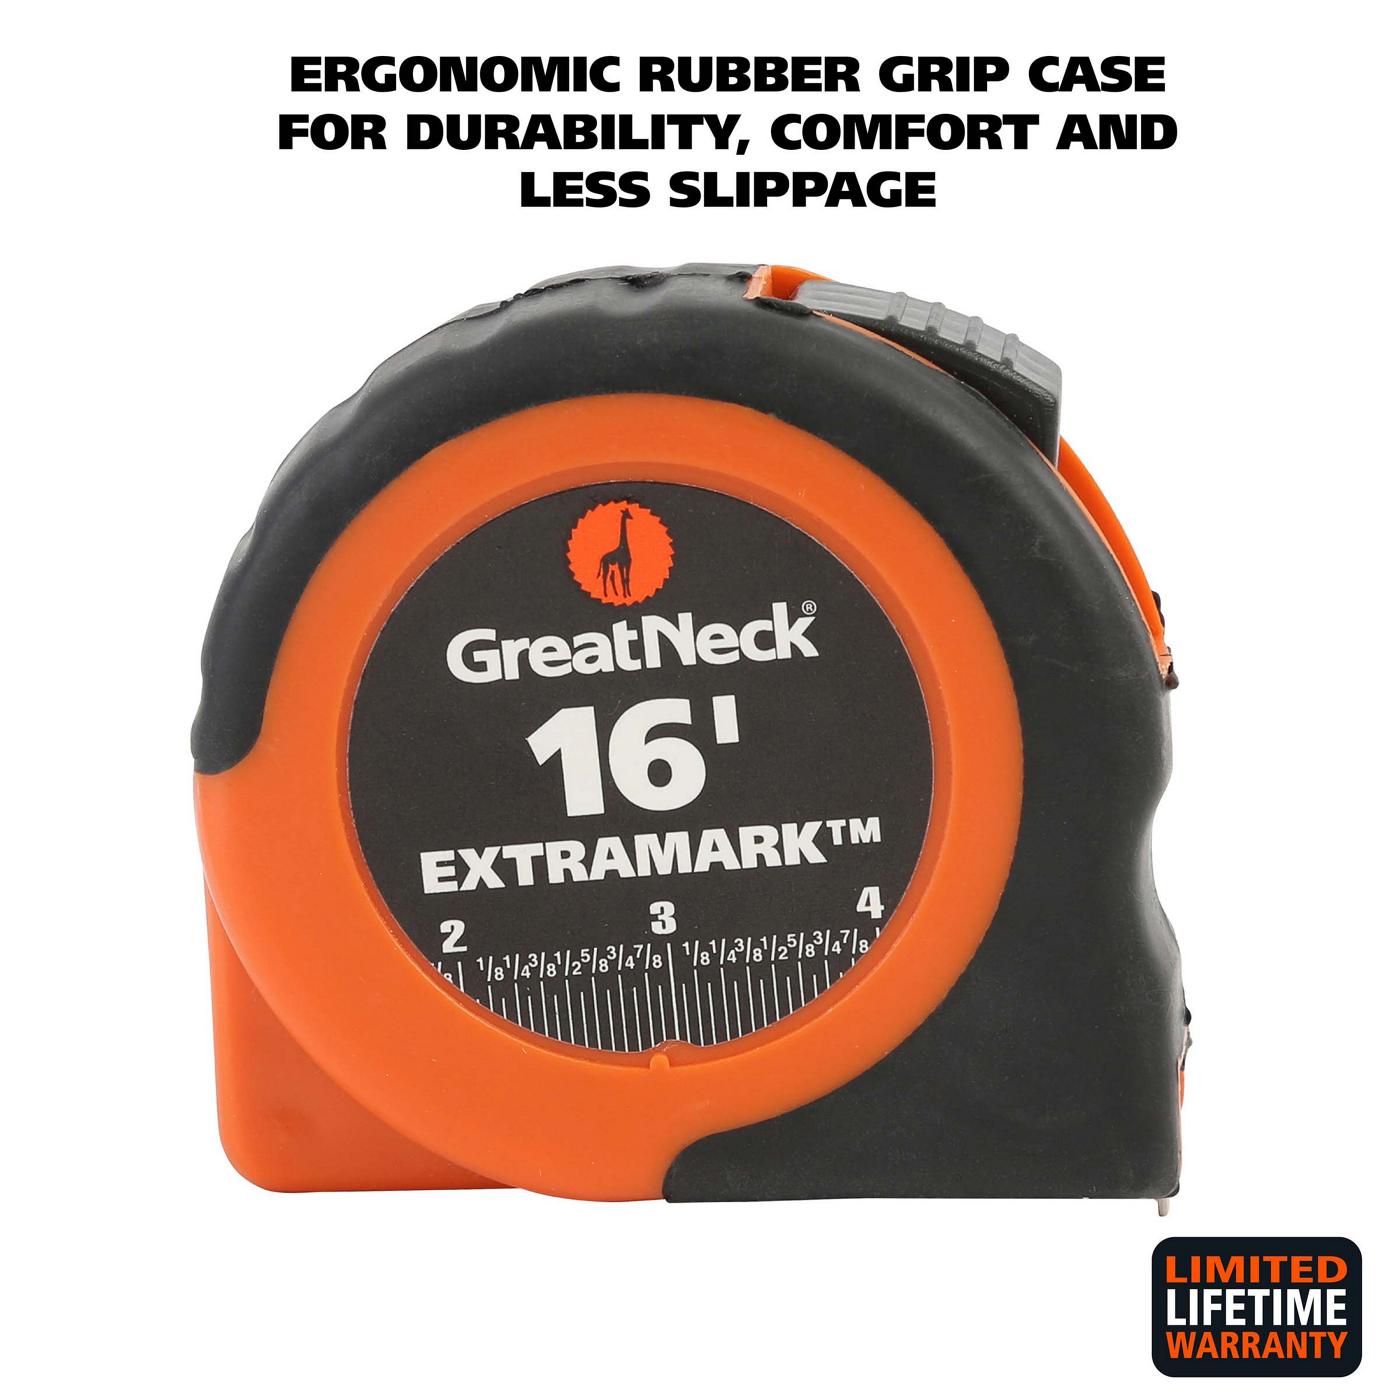 Great Neck ExtraMark™ Rubber Grip Tape Measure; image 2 of 9